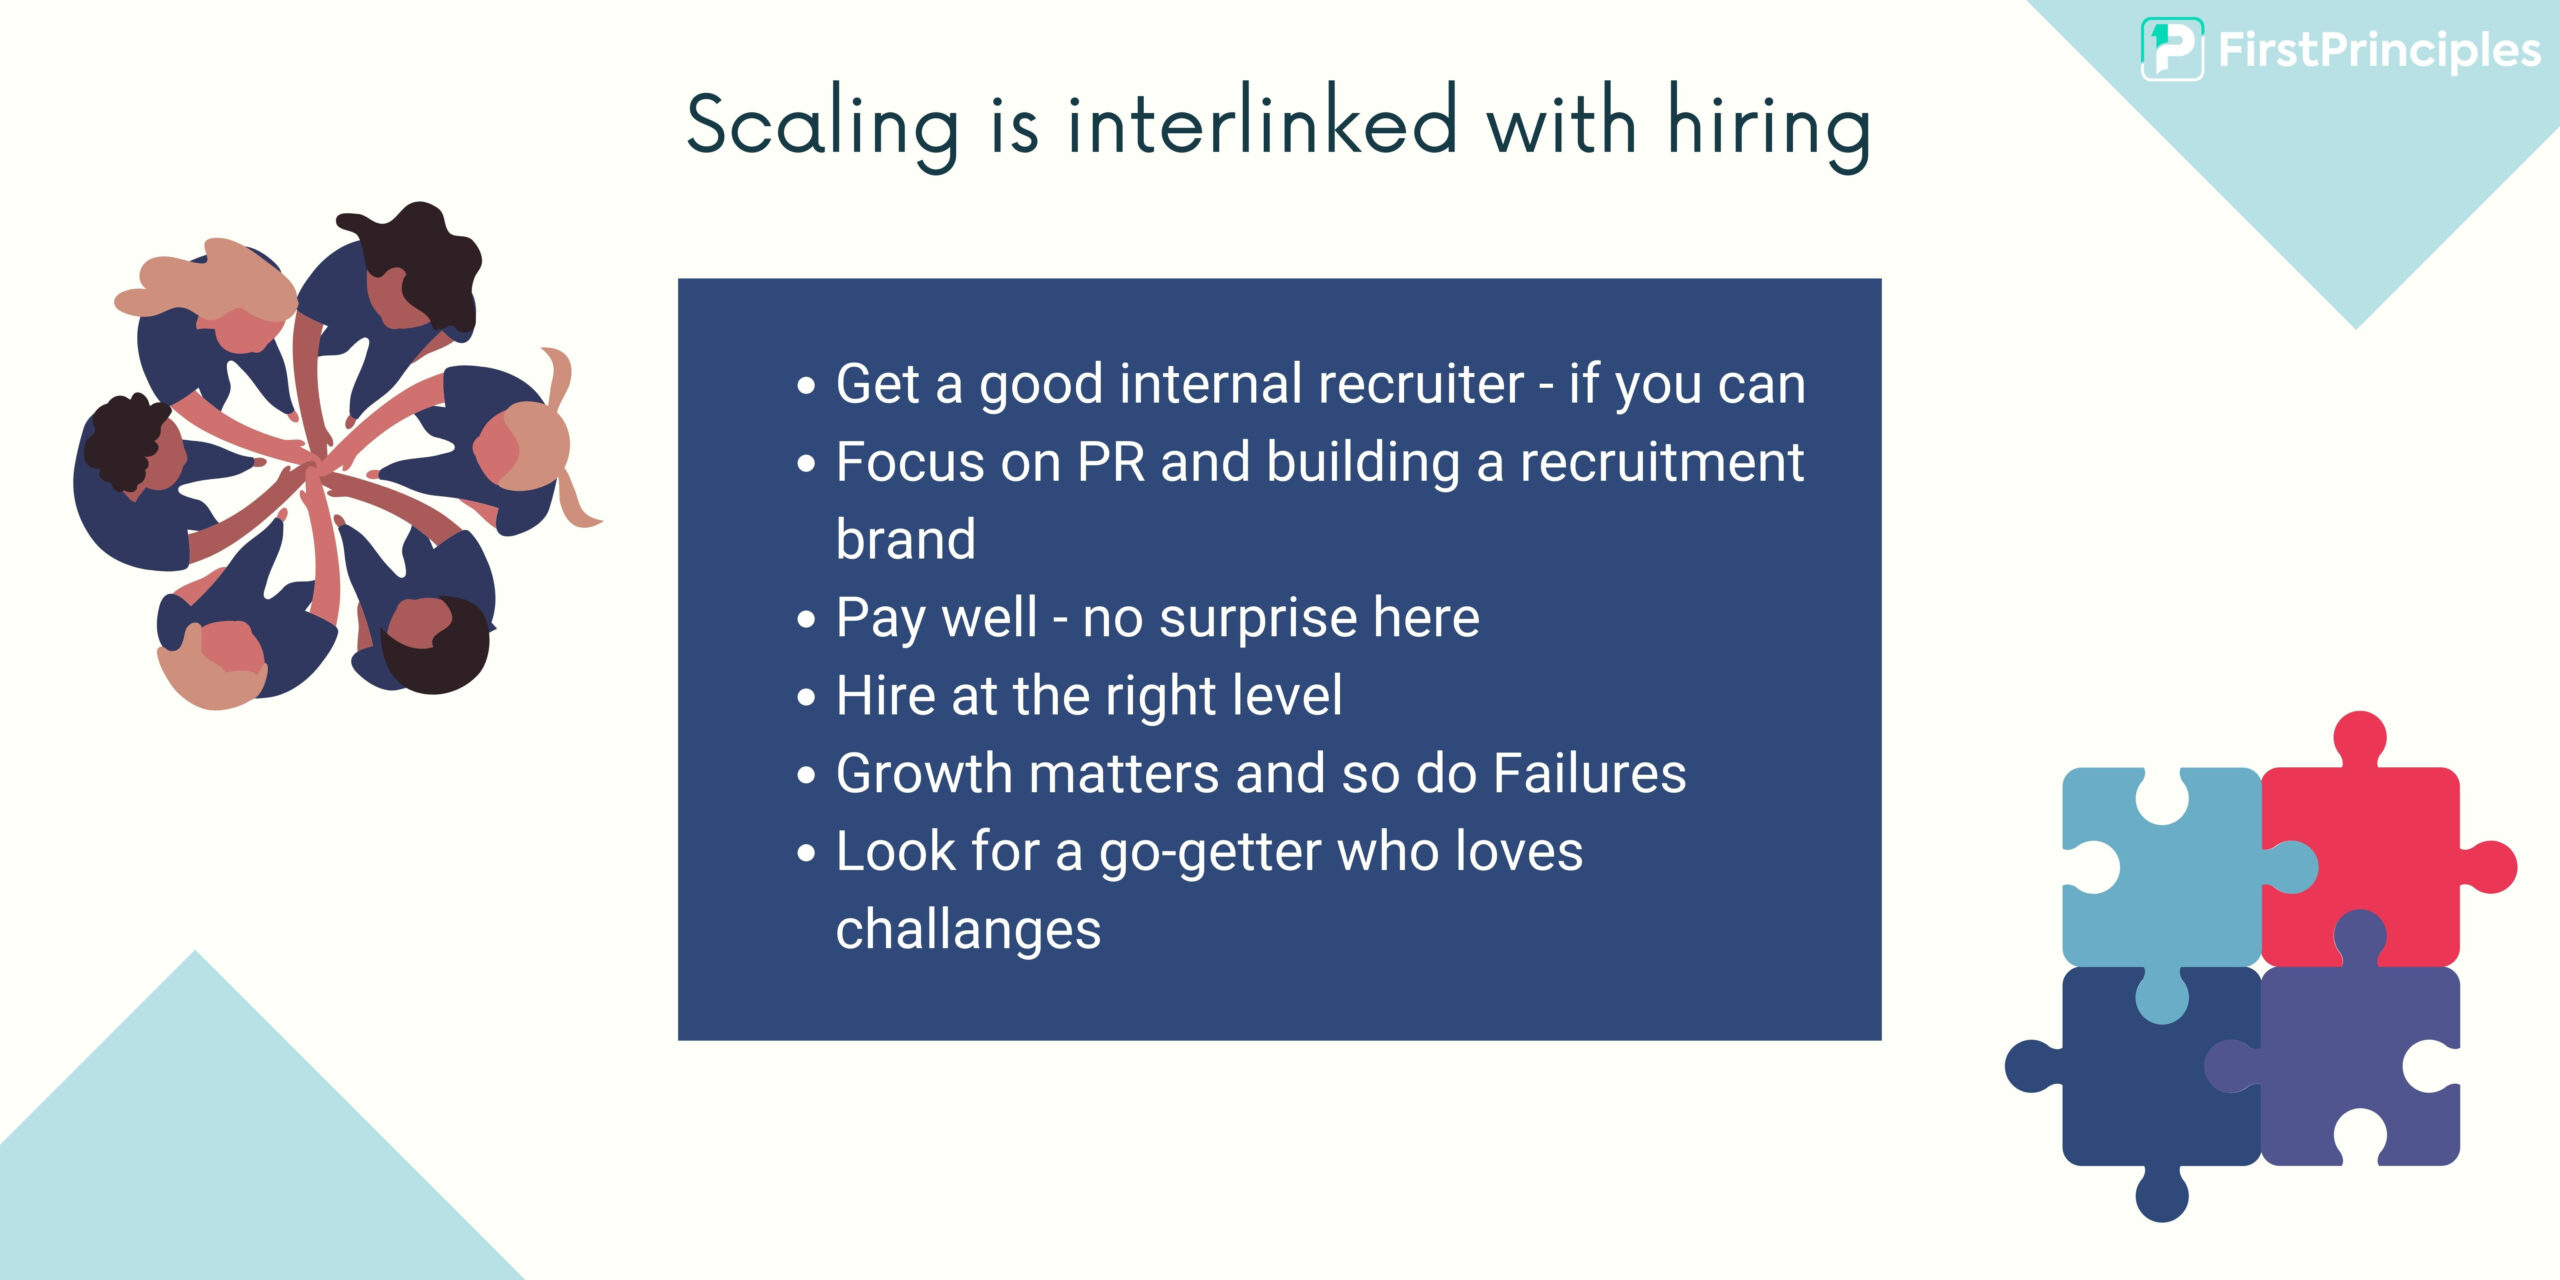 Scaling is interlinked with hiring